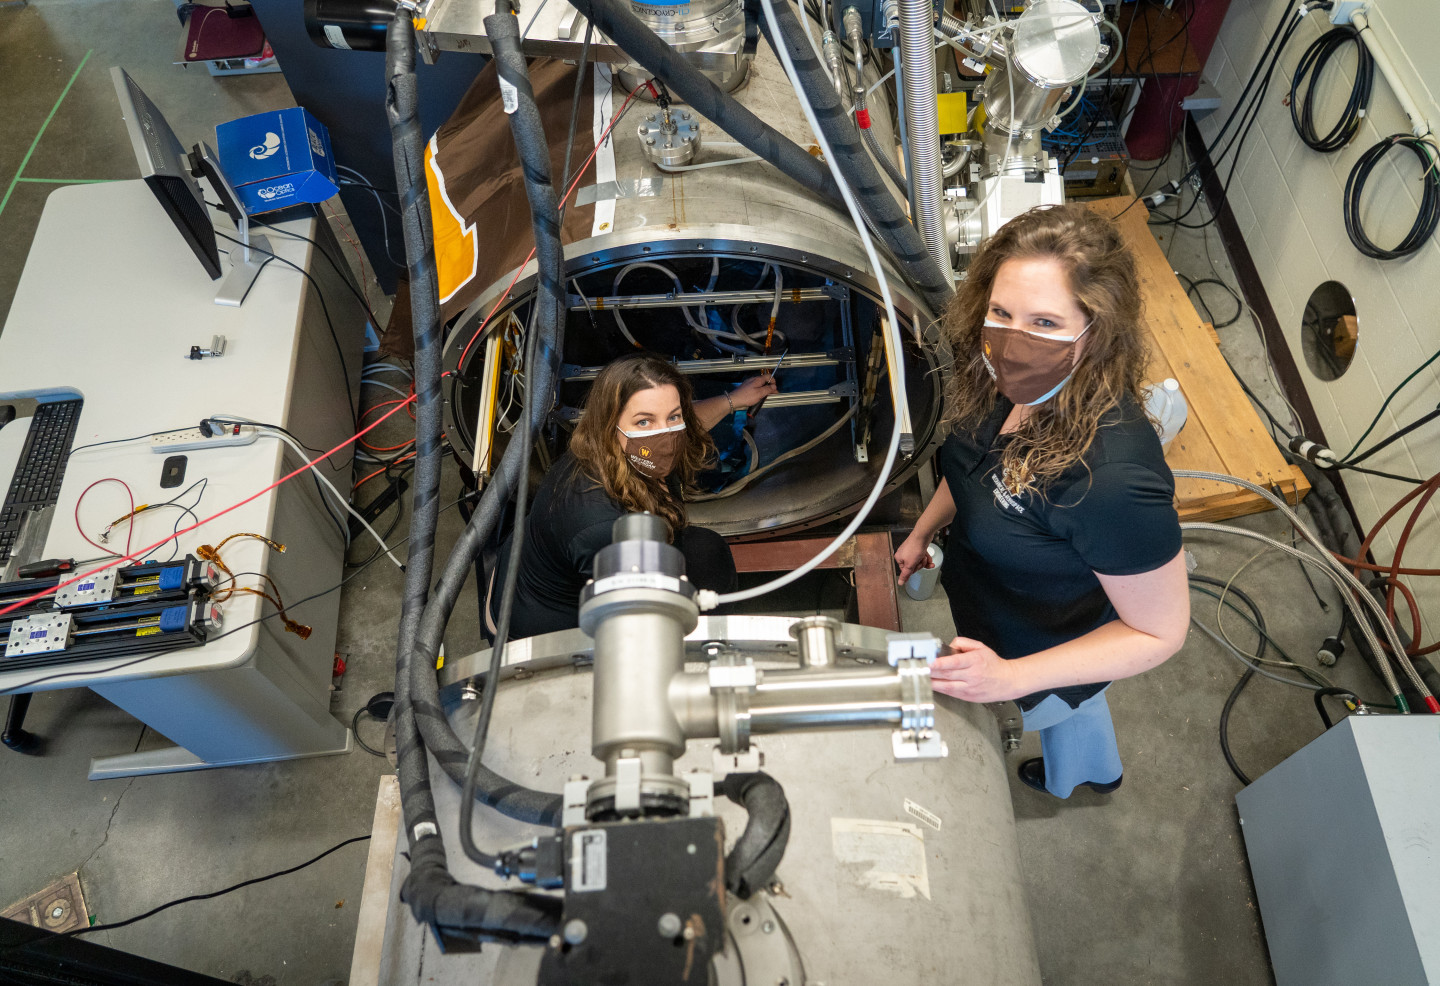 Two scientists in a large machine.